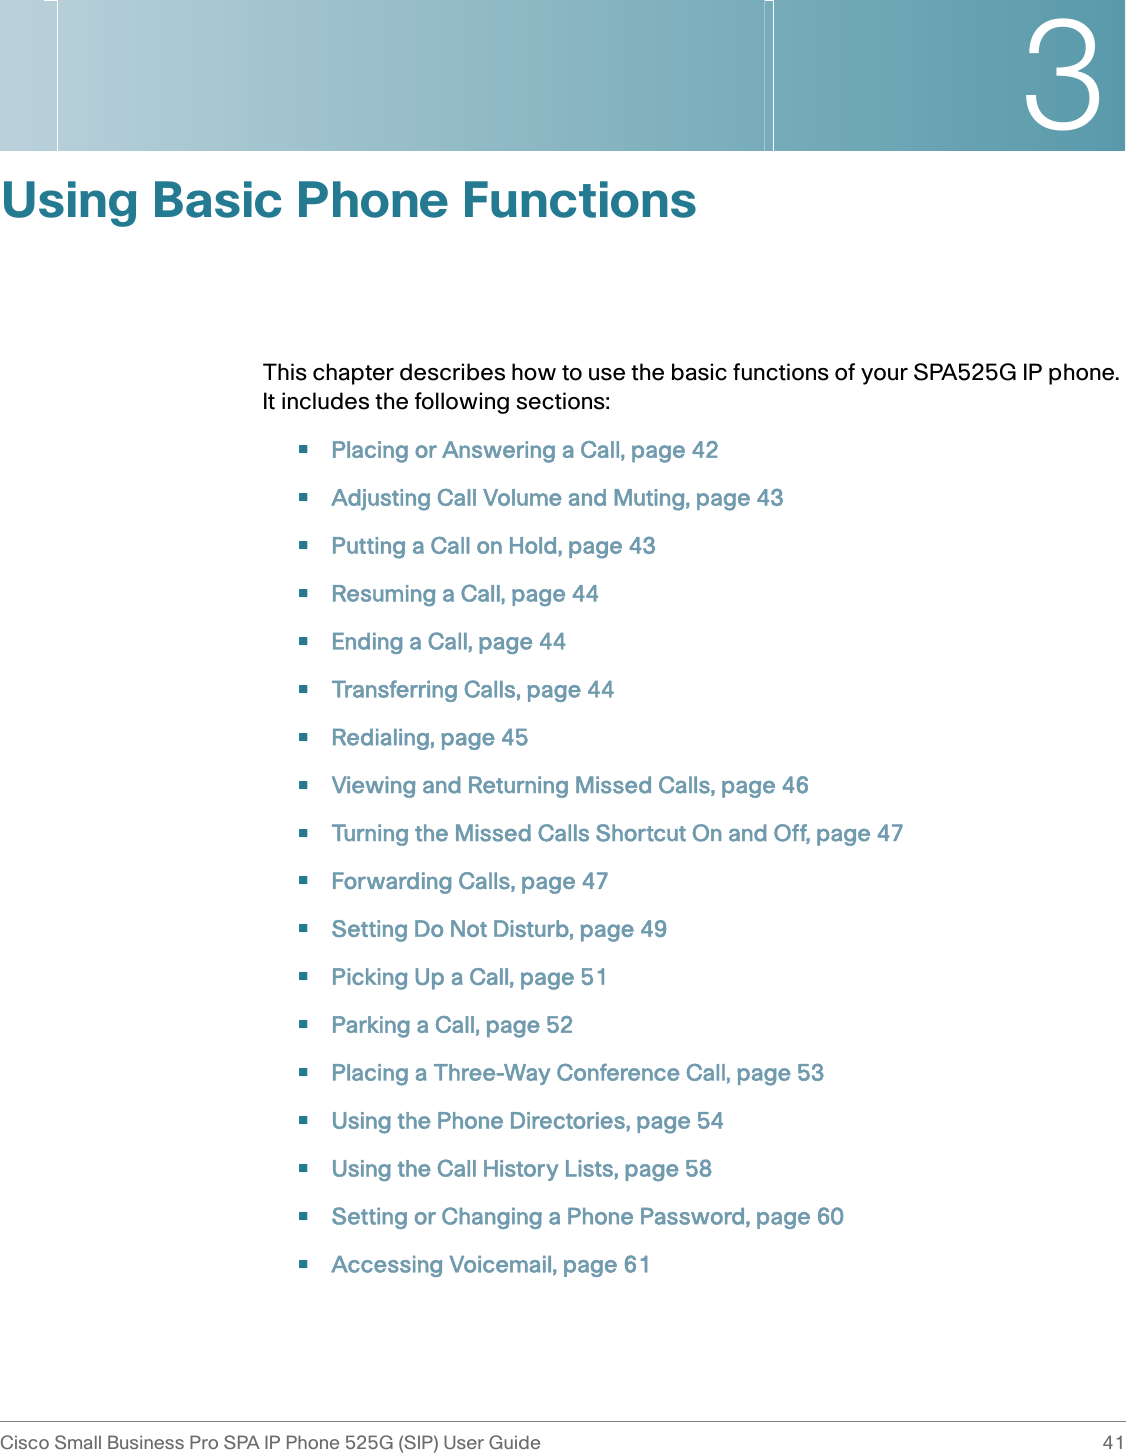 3Cisco Small Business Pro SPA IP Phone 525G (SIP) User Guide 41 Using Basic Phone FunctionsThis chapter describes how to use the basic functions of your SPA525G IP phone. It includes the following sections:•Placing or Answering a Call, page 42•Adjusting Call Volume and Muting, page 43•Putting a Call on Hold, page 43•Resuming a Call, page 44•Ending a Call, page 44•Transferring Calls, page 44•Redialing, page 45•Viewing and Returning Missed Calls, page 46•Turning the Missed Calls Shortcut On and Off, page 47•Forwarding Calls, page 47•Setting Do Not Disturb, page 49•Picking Up a Call, page 51•Parking a Call, page 52•Placing a Three-Way Conference Call, page 53•Using the Phone Directories, page 54•Using the Call History Lists, page 58•Setting or Changing a Phone Password, page 60•Accessing Voicemail, page 61